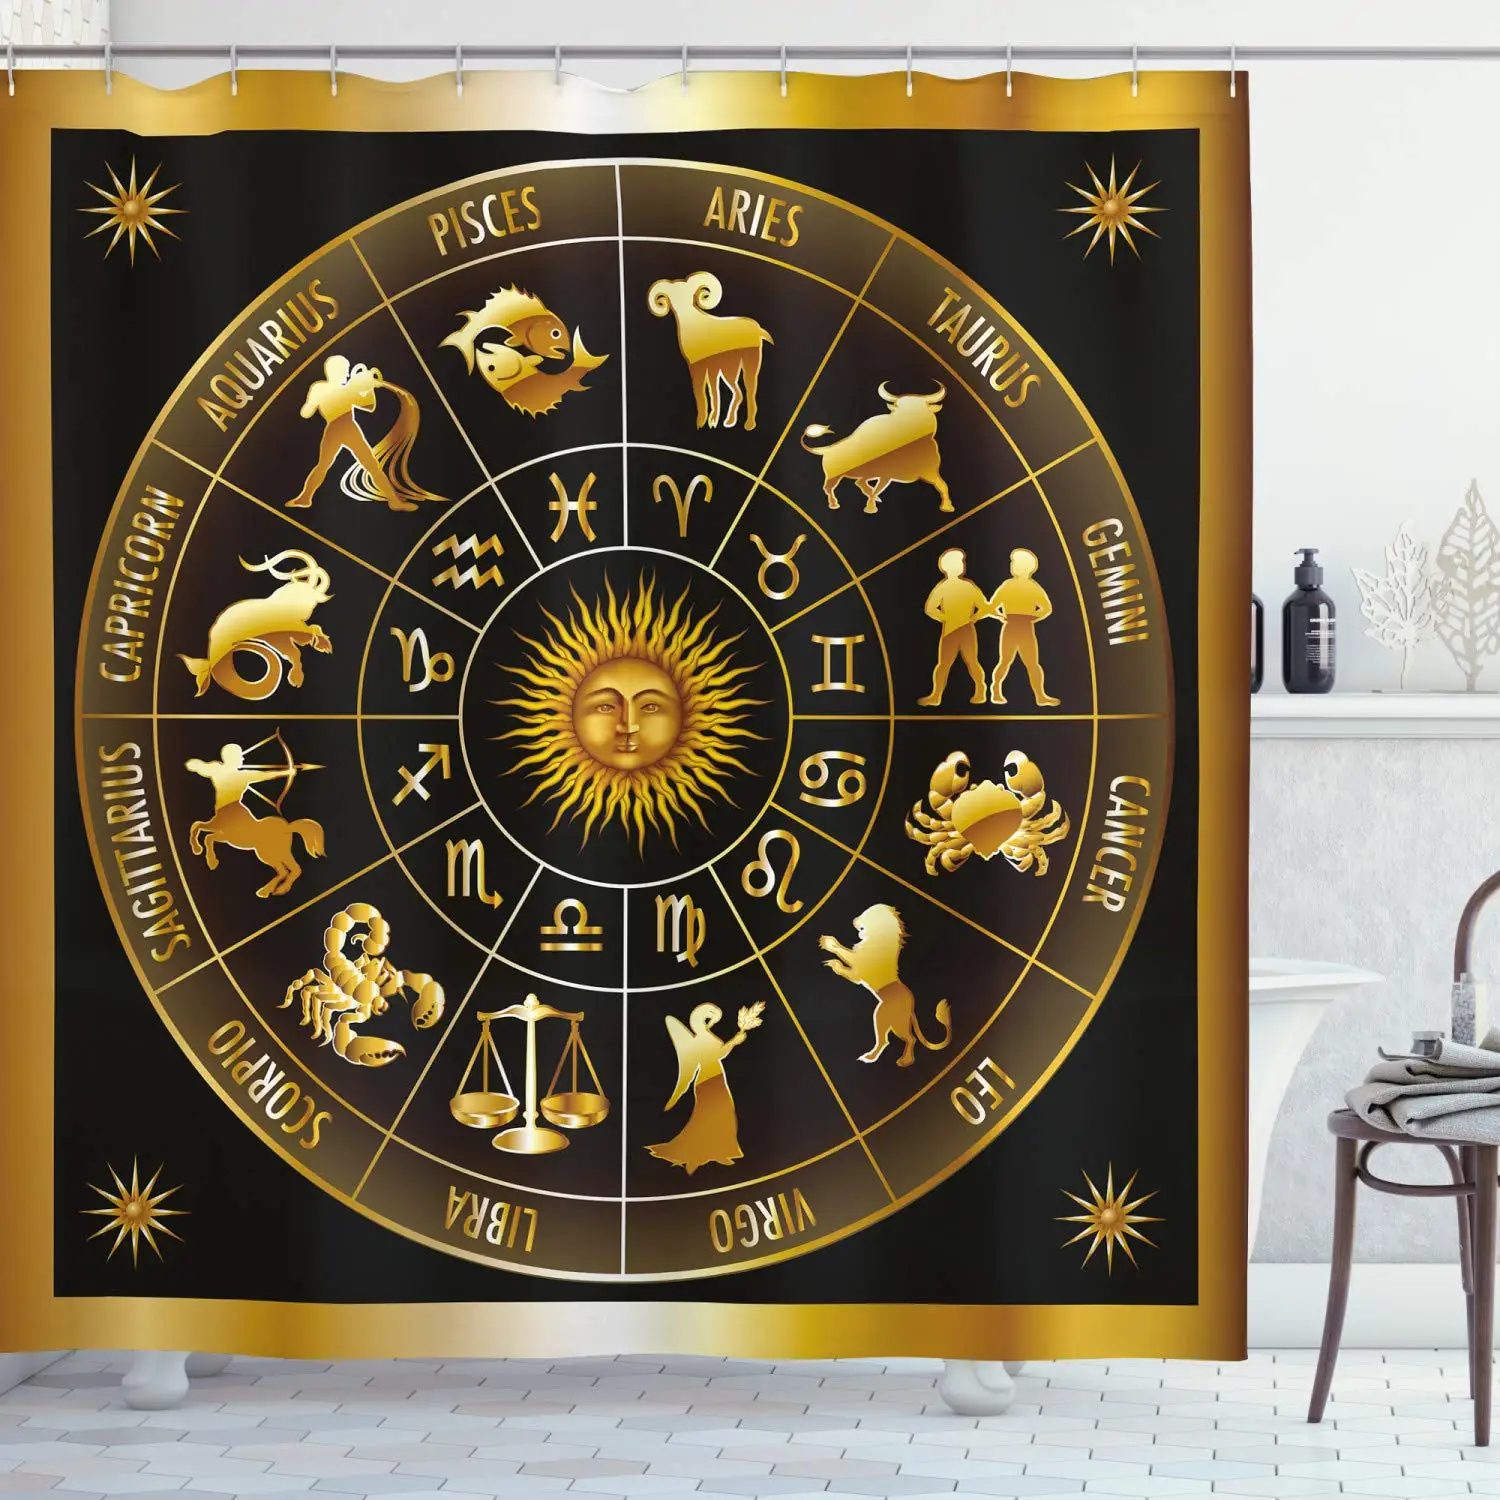 Waterproof Fabric Shower Curtain Set Circle with Signs of Zodiac Constellations